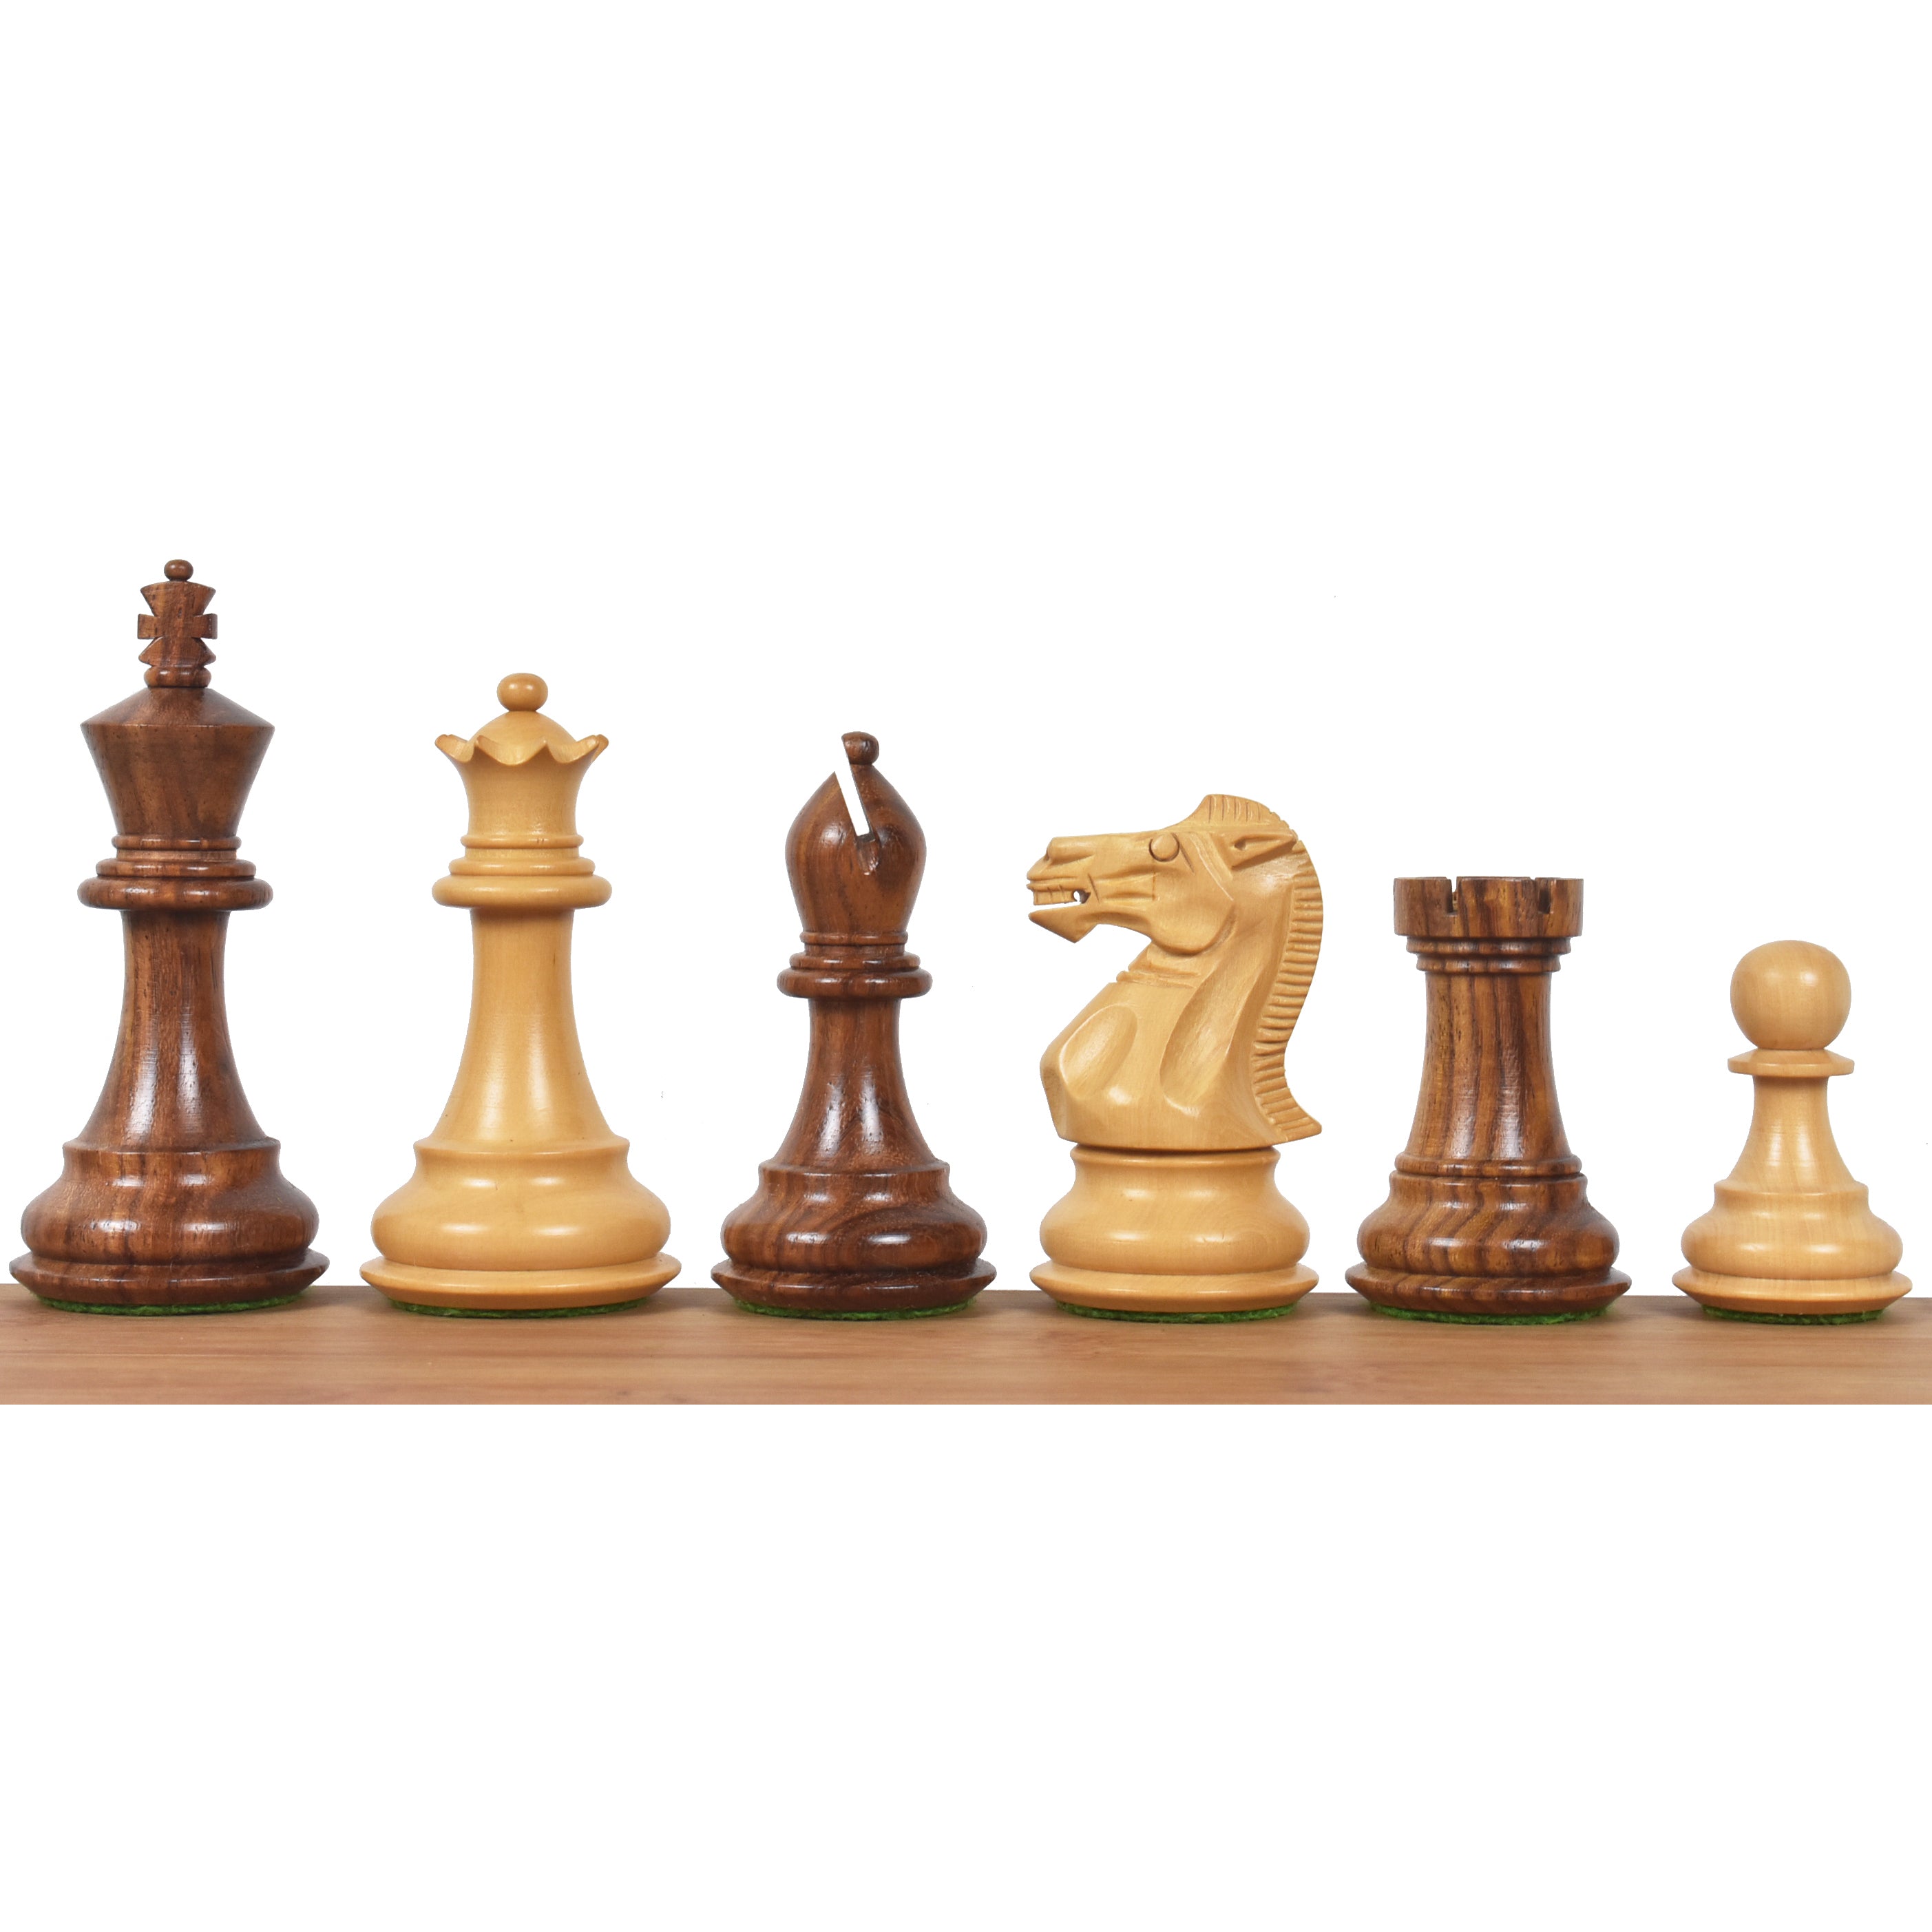 Custom Chess Set and Game Table - 34 Pieces